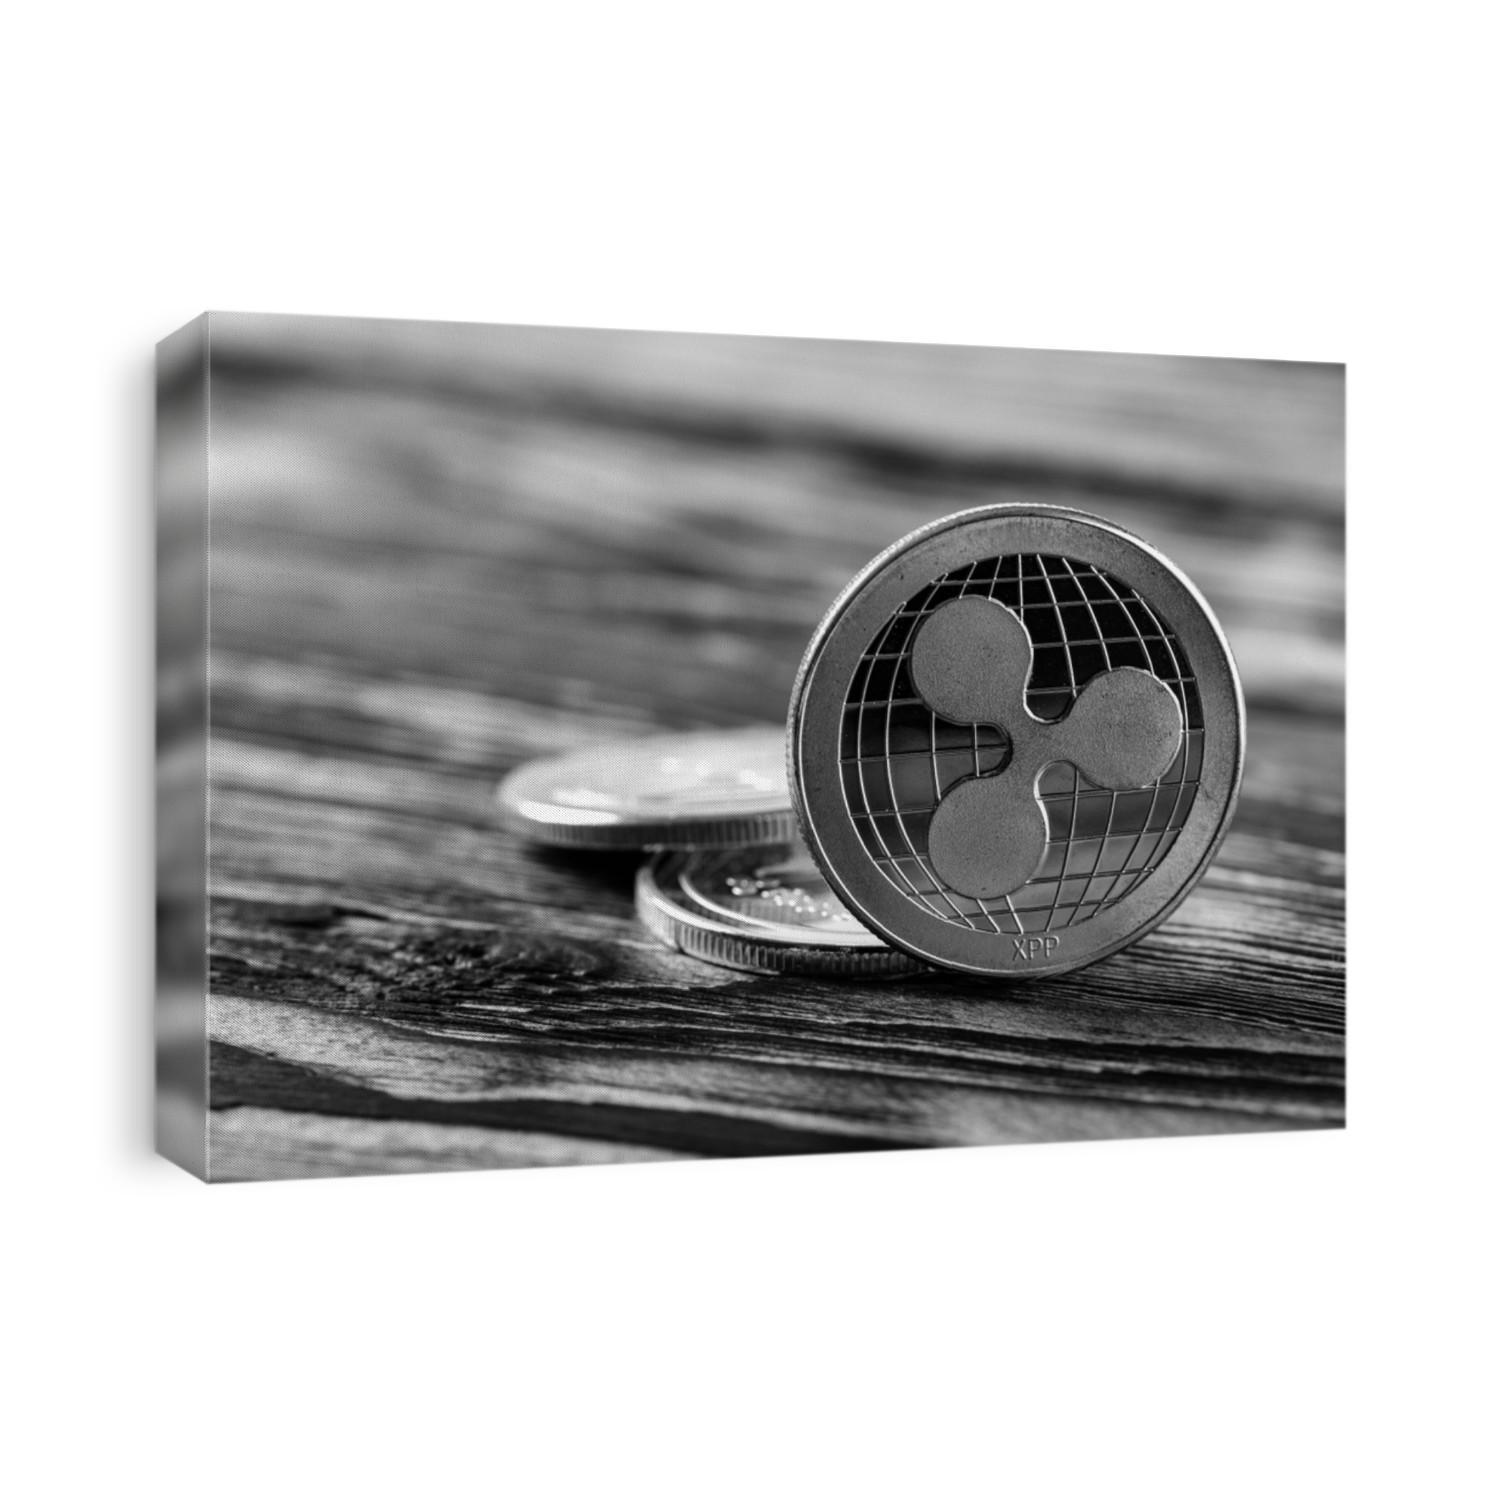 silver ripple xrp coins on a black wood background